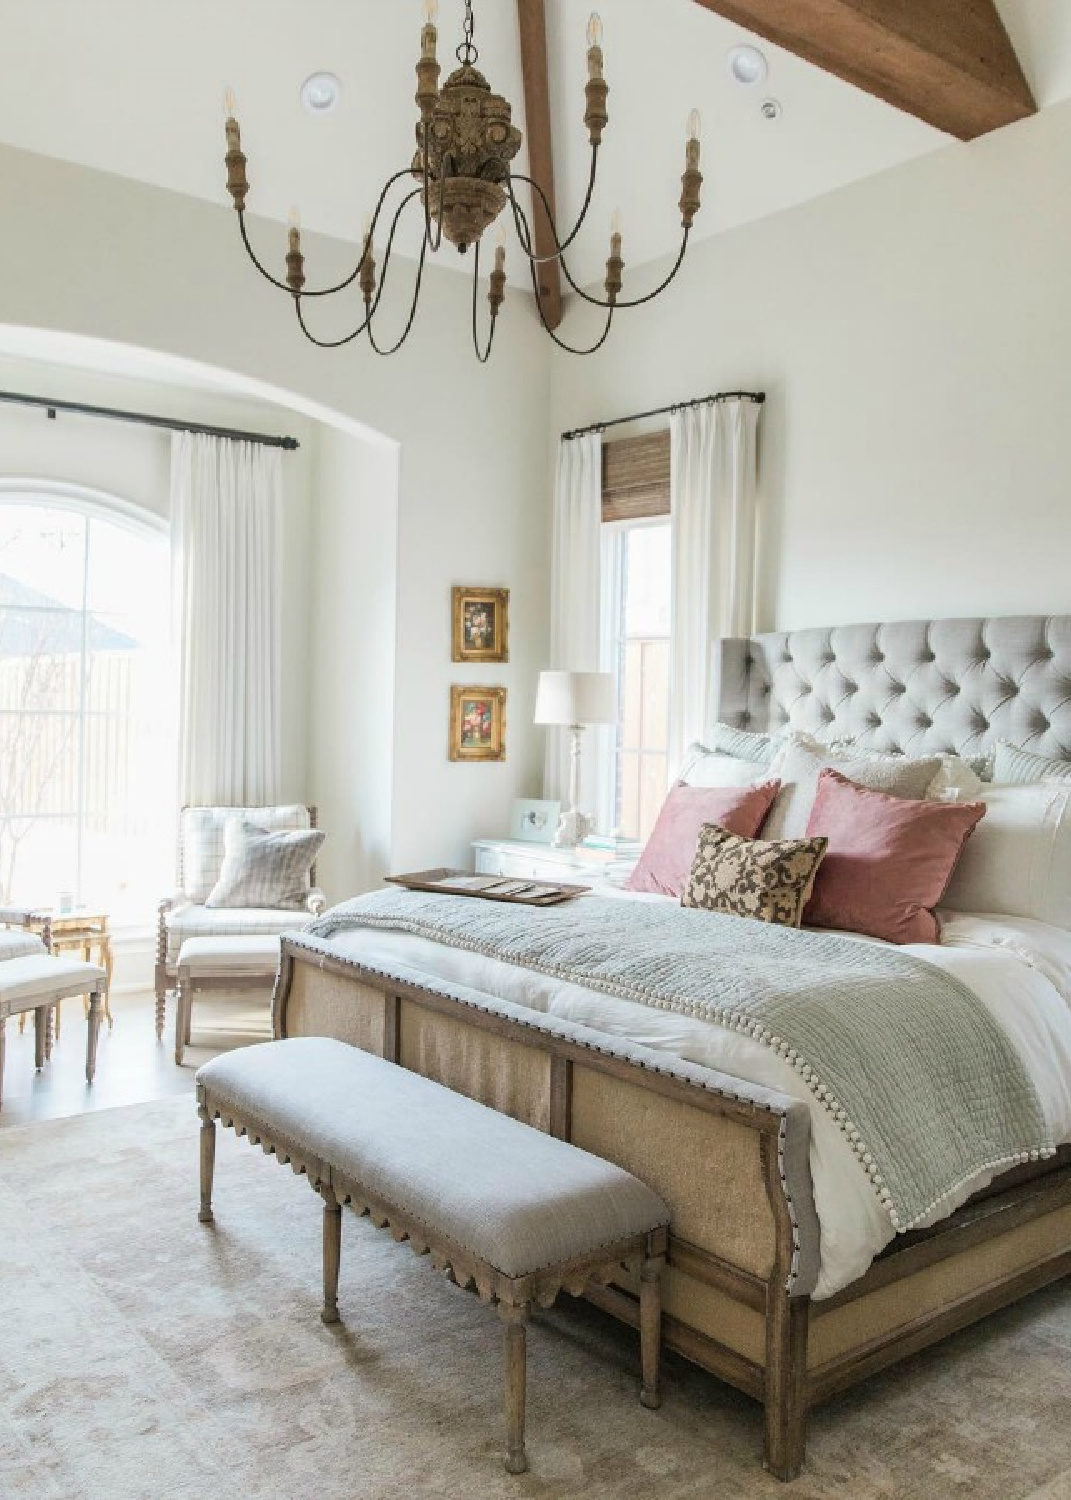 SW Alabaster painted walls in a French country bedroom with tufted headboard and bay window - Brit Jones Design. #CountryFrench #BedroomDecorIdeas